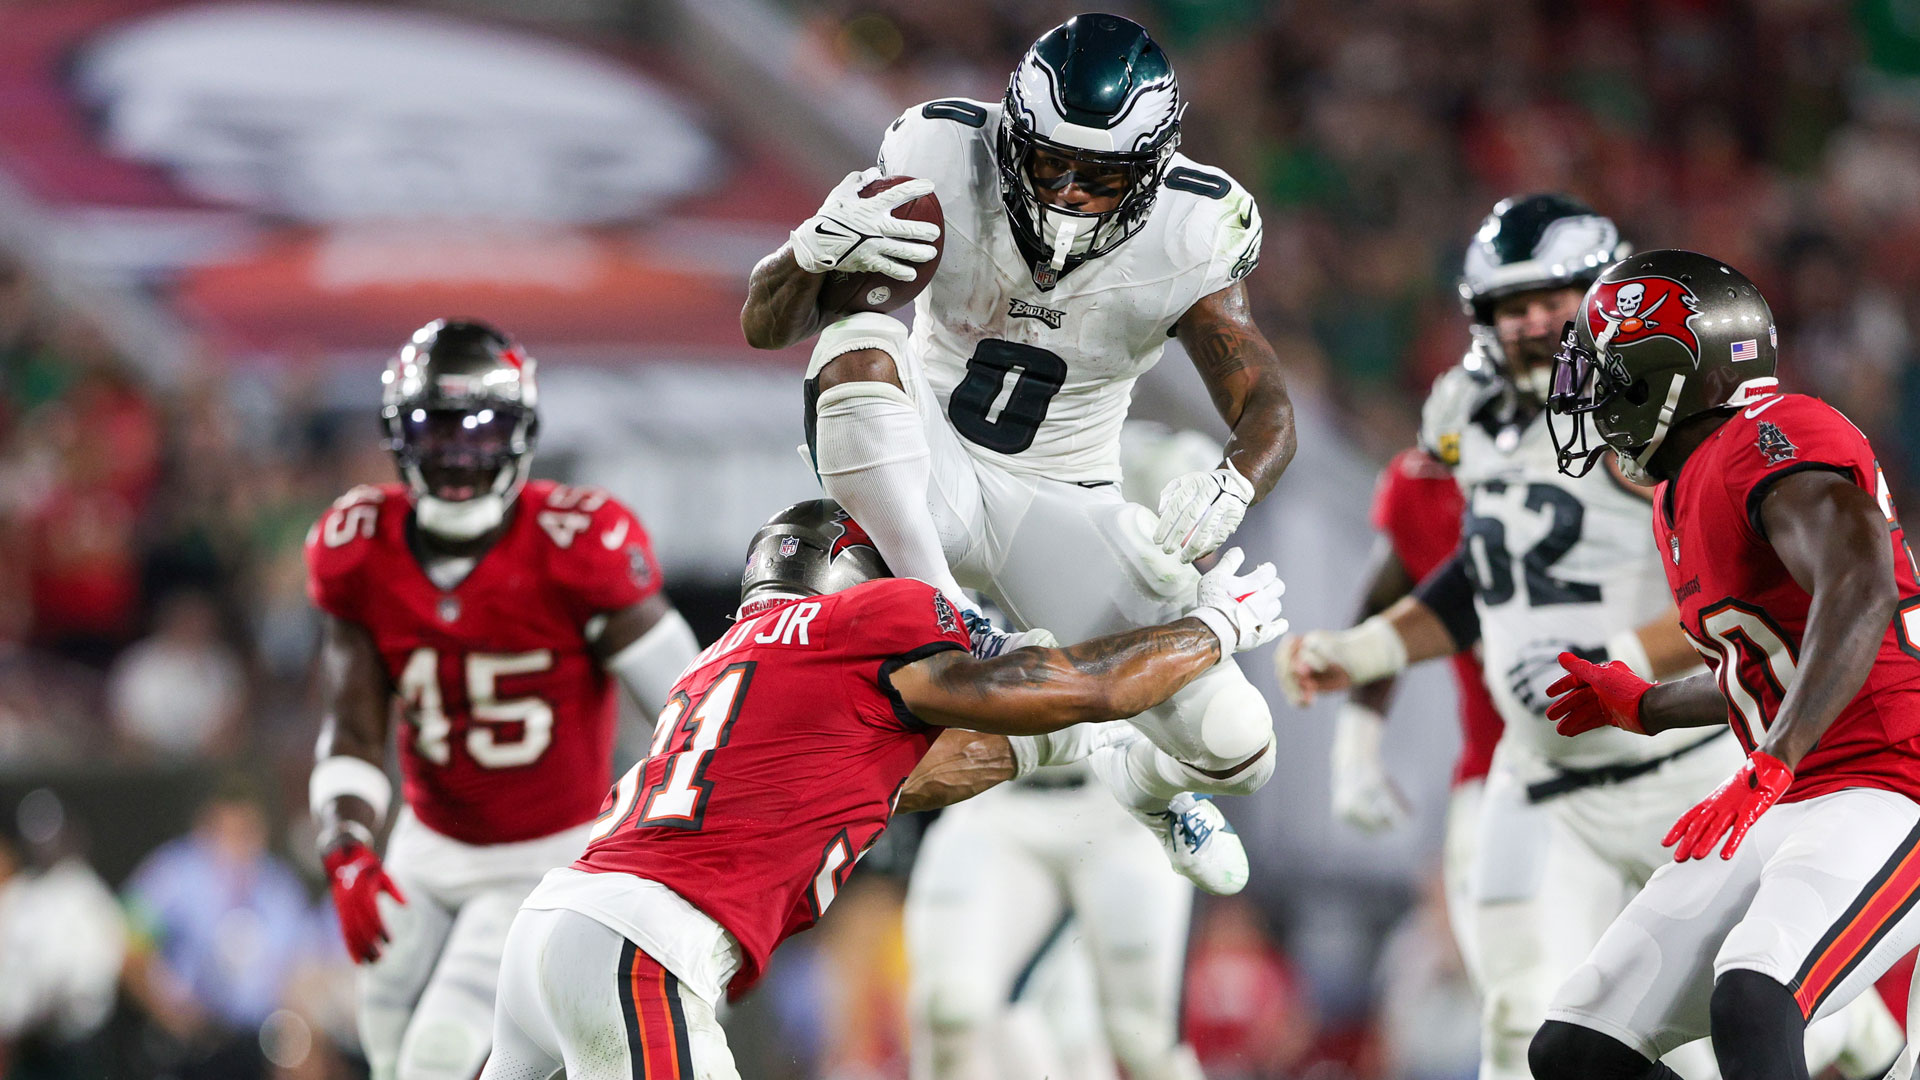 Eagles improve to 3-0 with dominant win over Buccaneers - NBC Sports